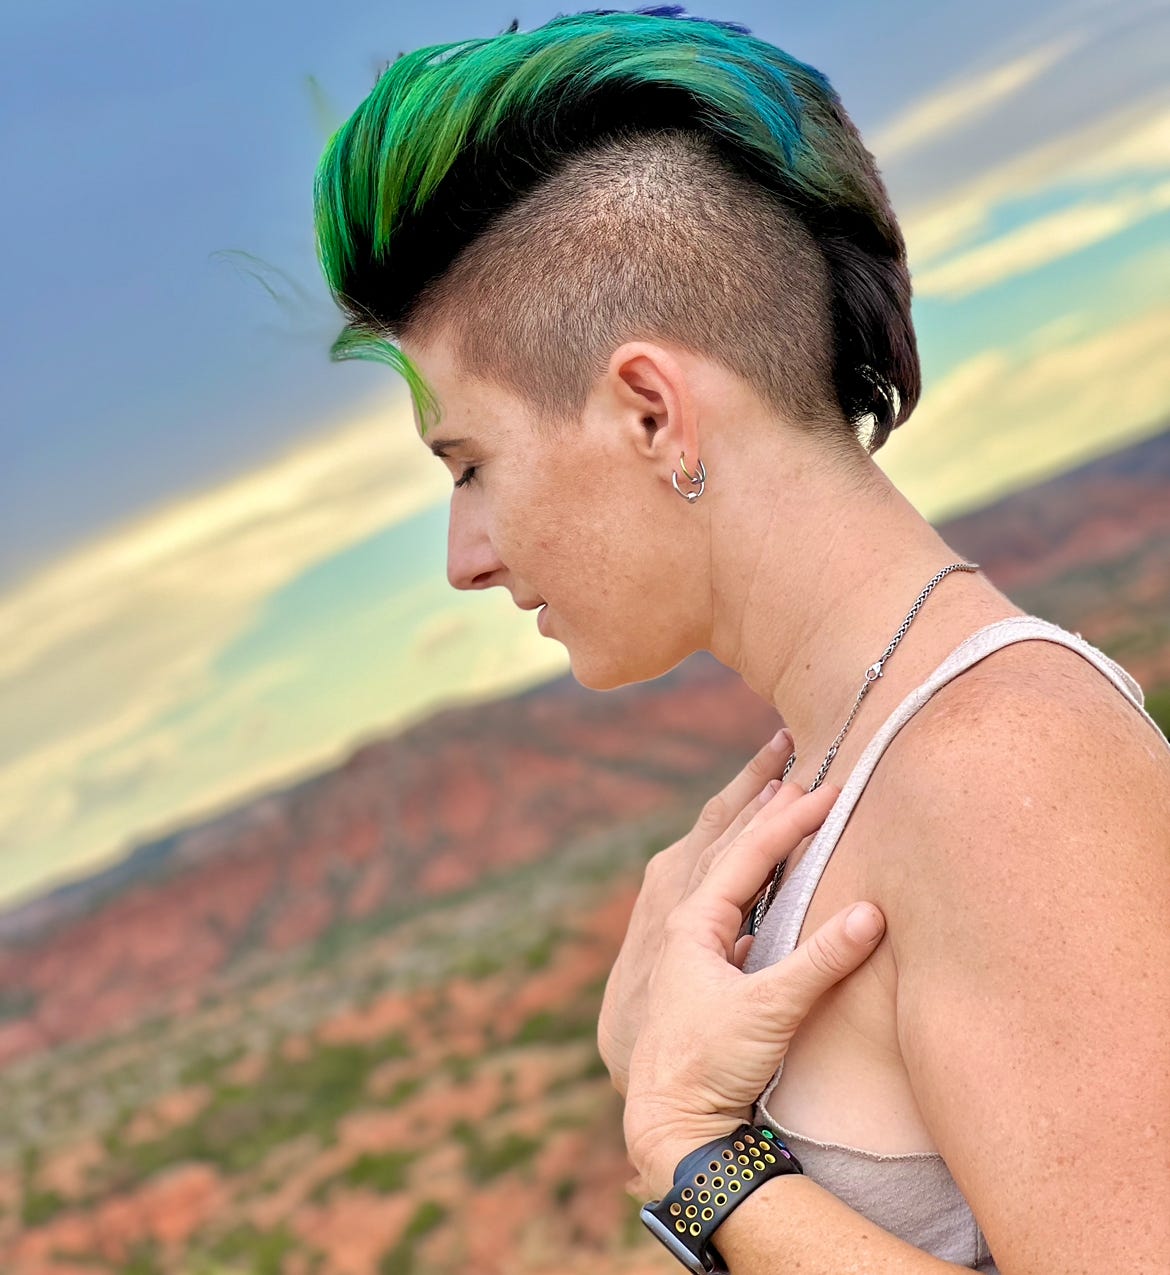 Adult Lyric, with short green hair, and a white tank-top. They stand in the desert as they close their eyes, as if visualizing something. 